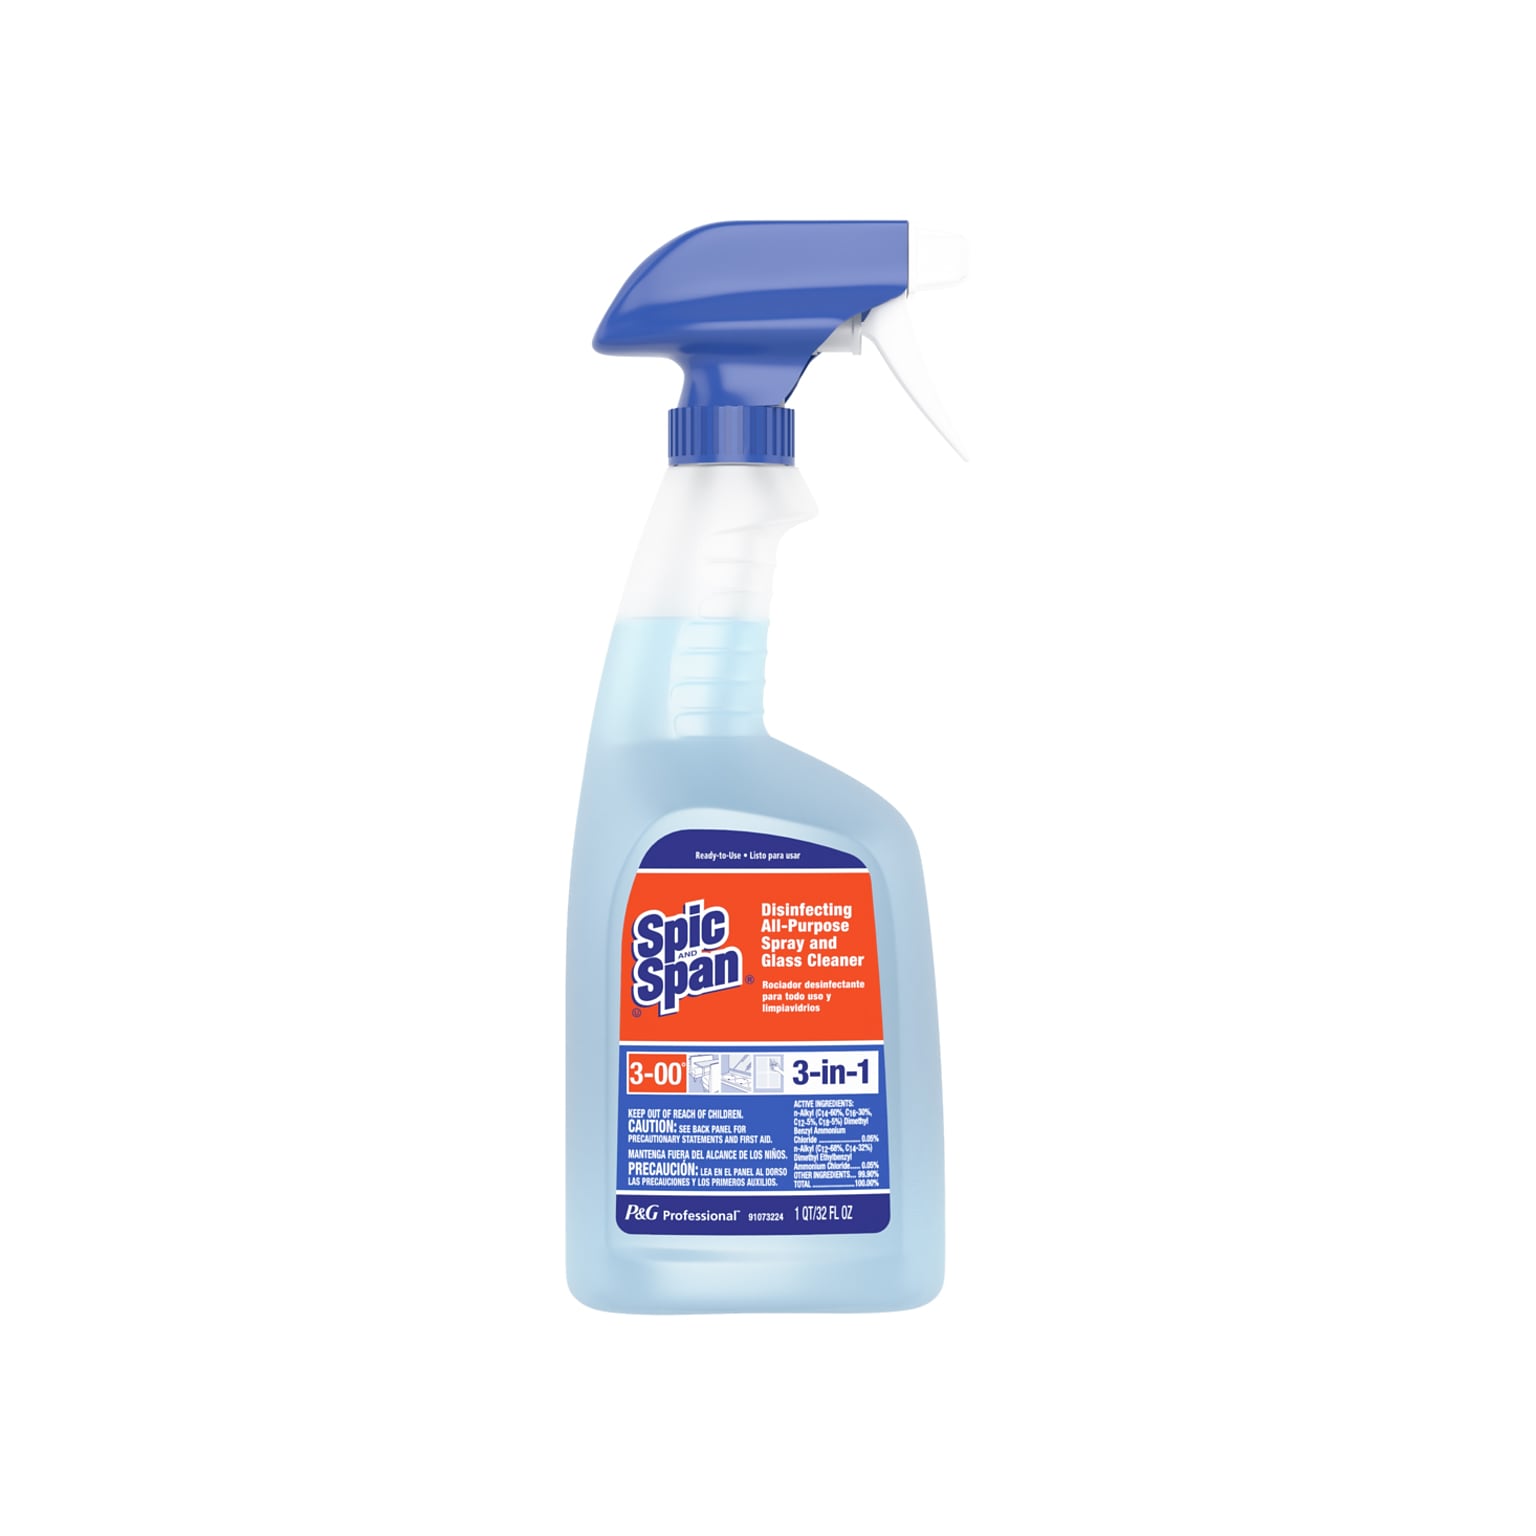 Spic & Span Disinfecting All-Purpose Spray and Glass Cleaner, Fresh Scent, 32 Fl. Oz., 8/Carton (58775)